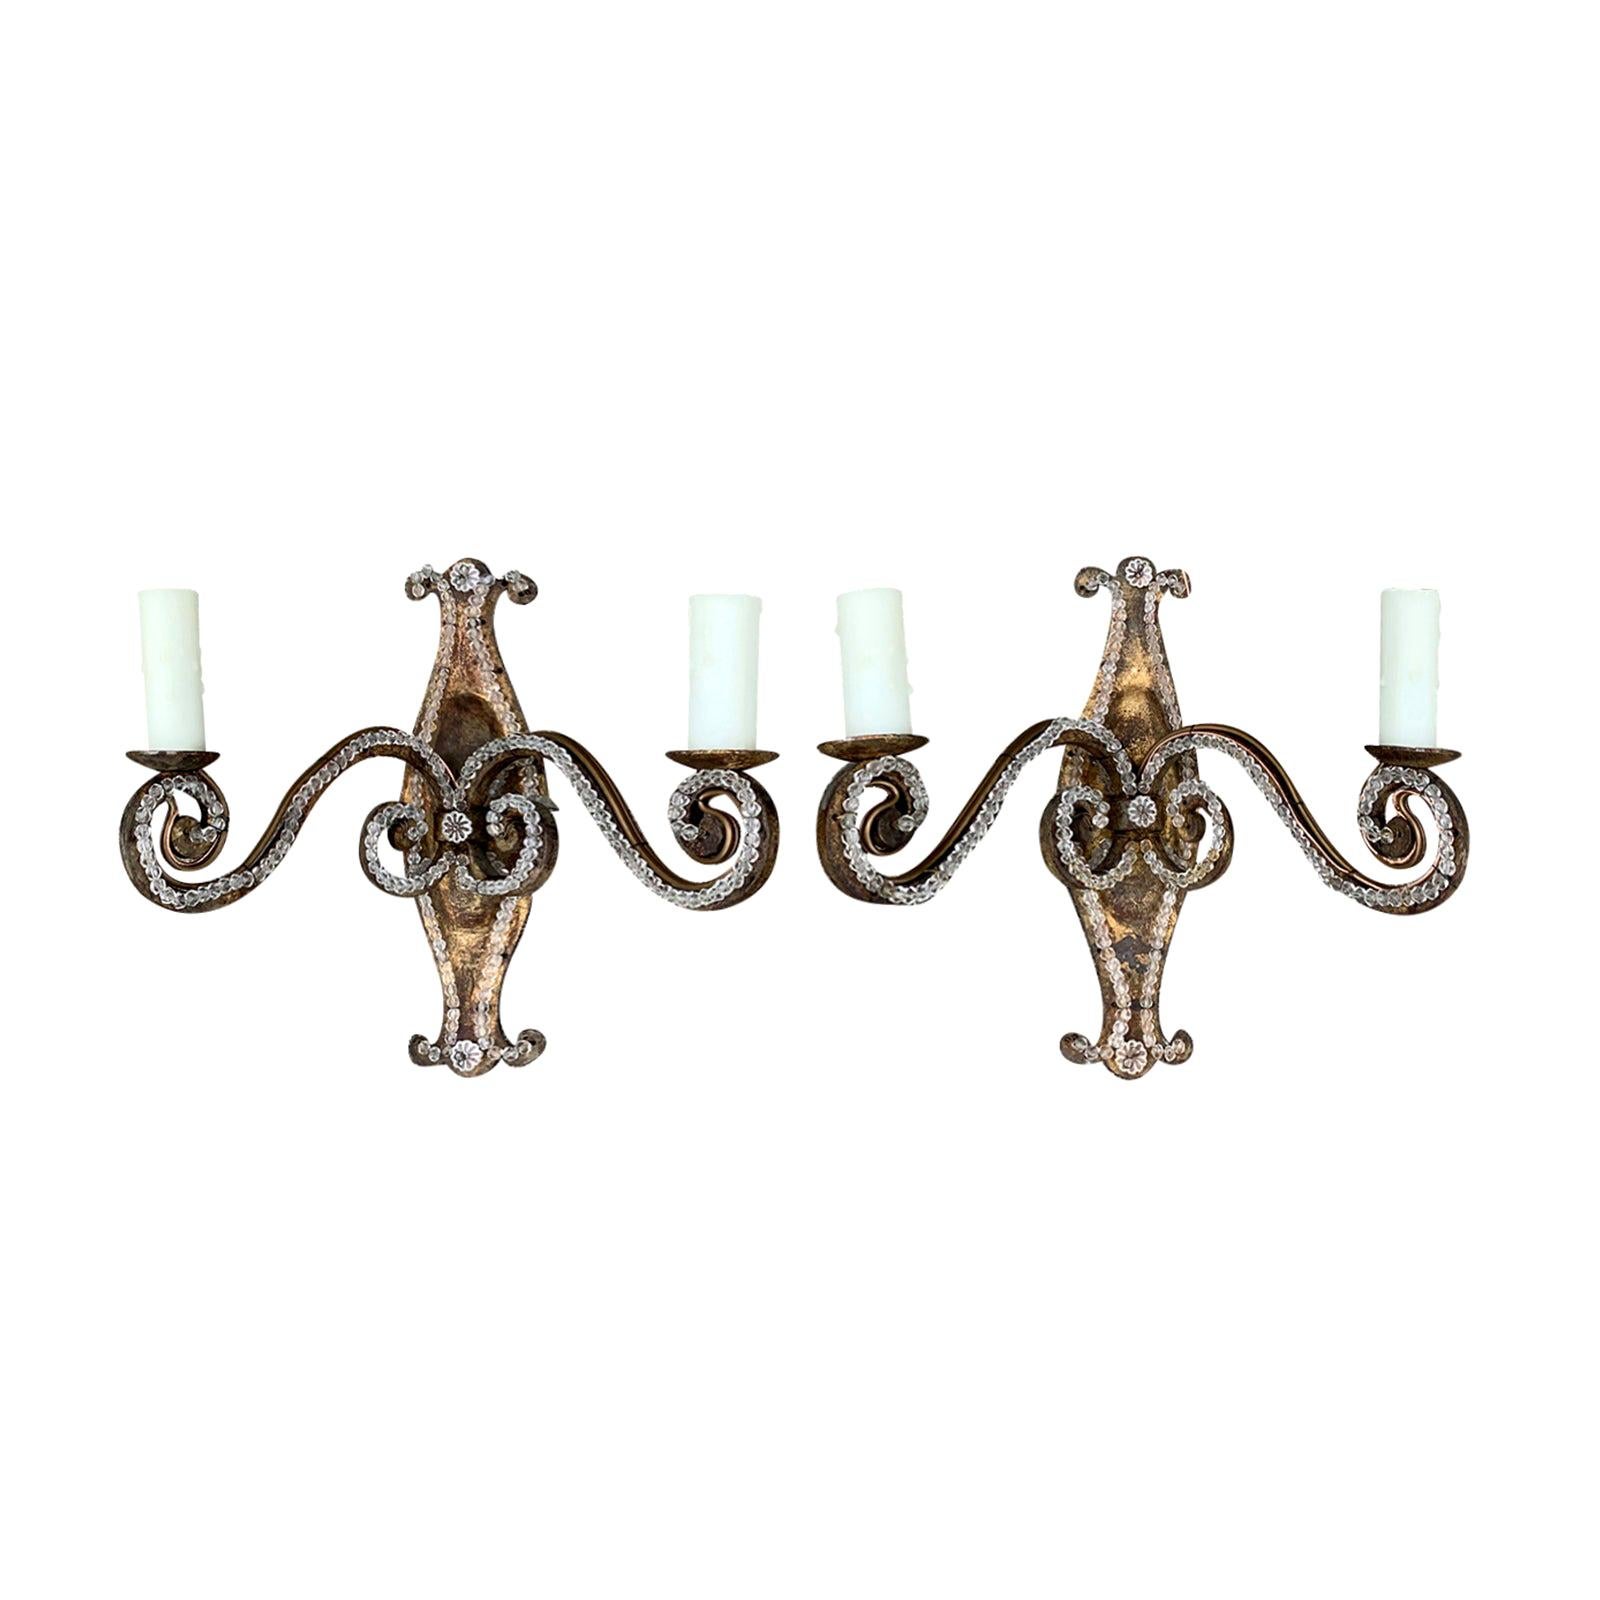 Pair of 20th Century French Beaded Glass Sconces in the Style of Maison Baguès